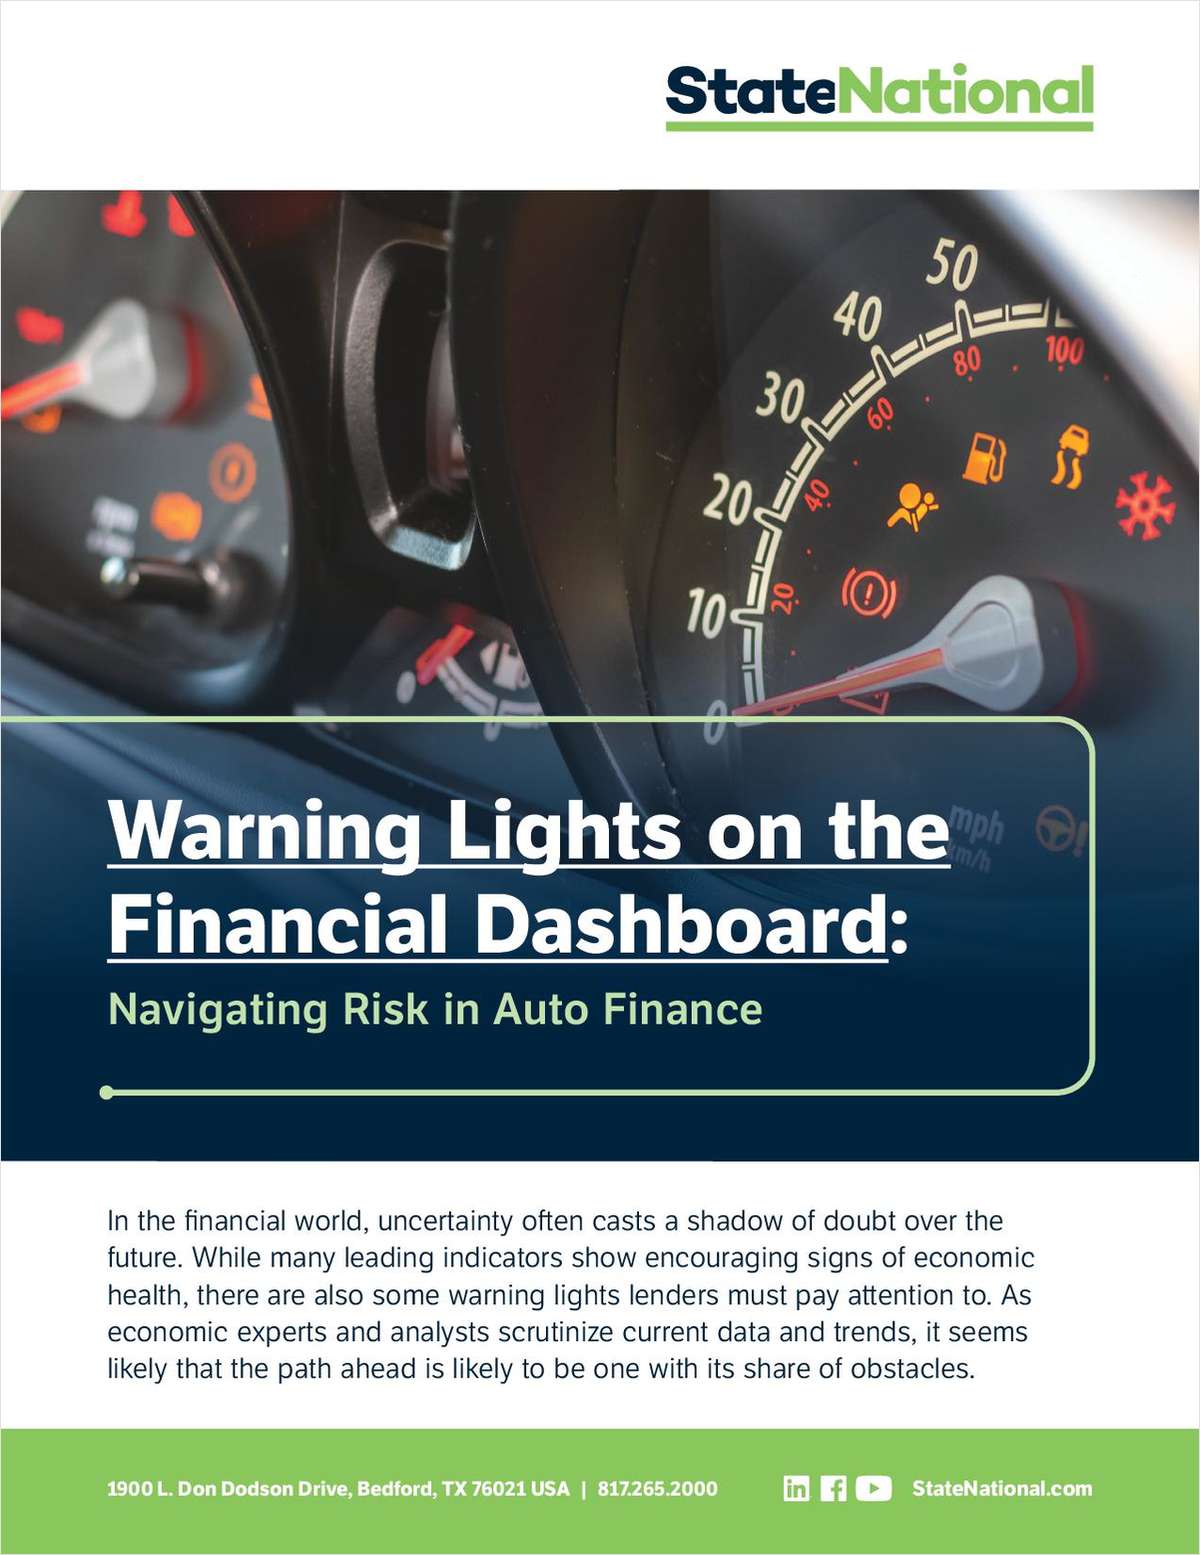 Warning Lights on the Financial Dashboard: Navigating Risk in Auto Finance